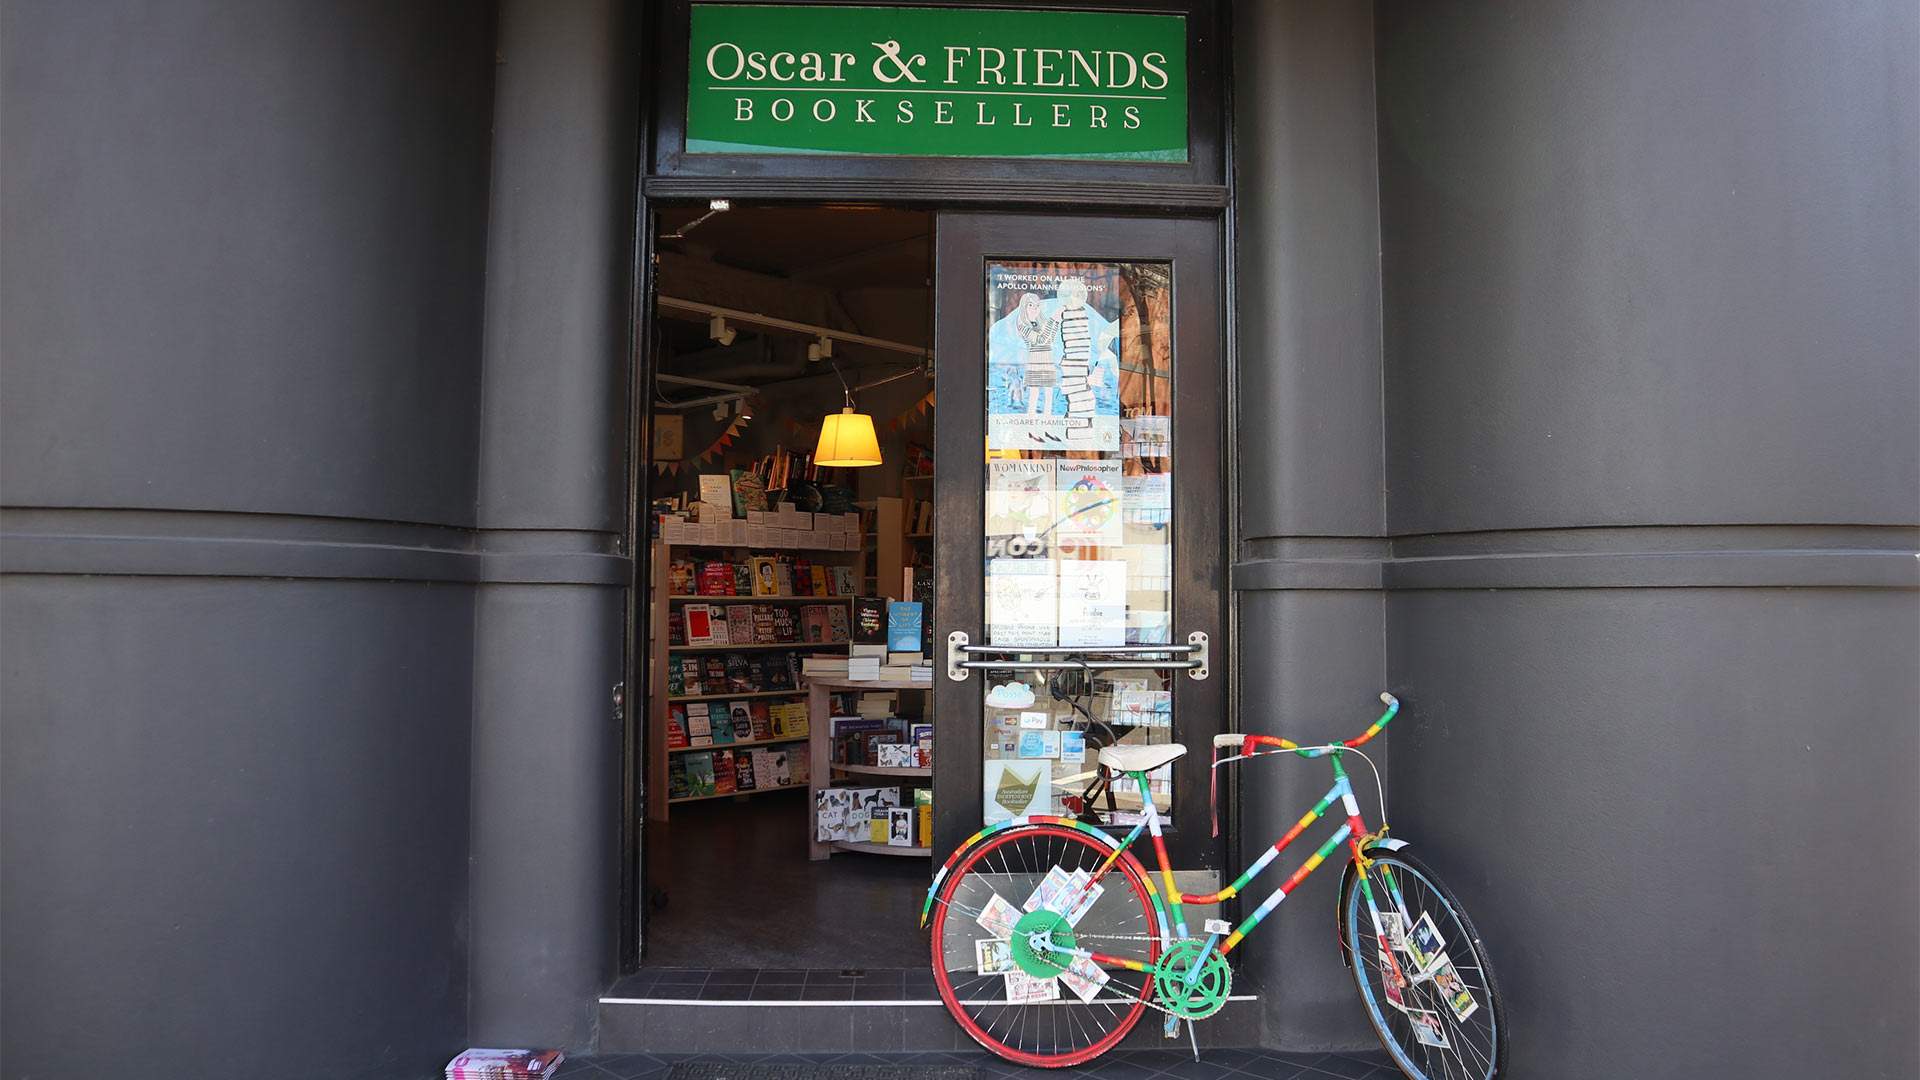 Oscar and Friends Booksellers